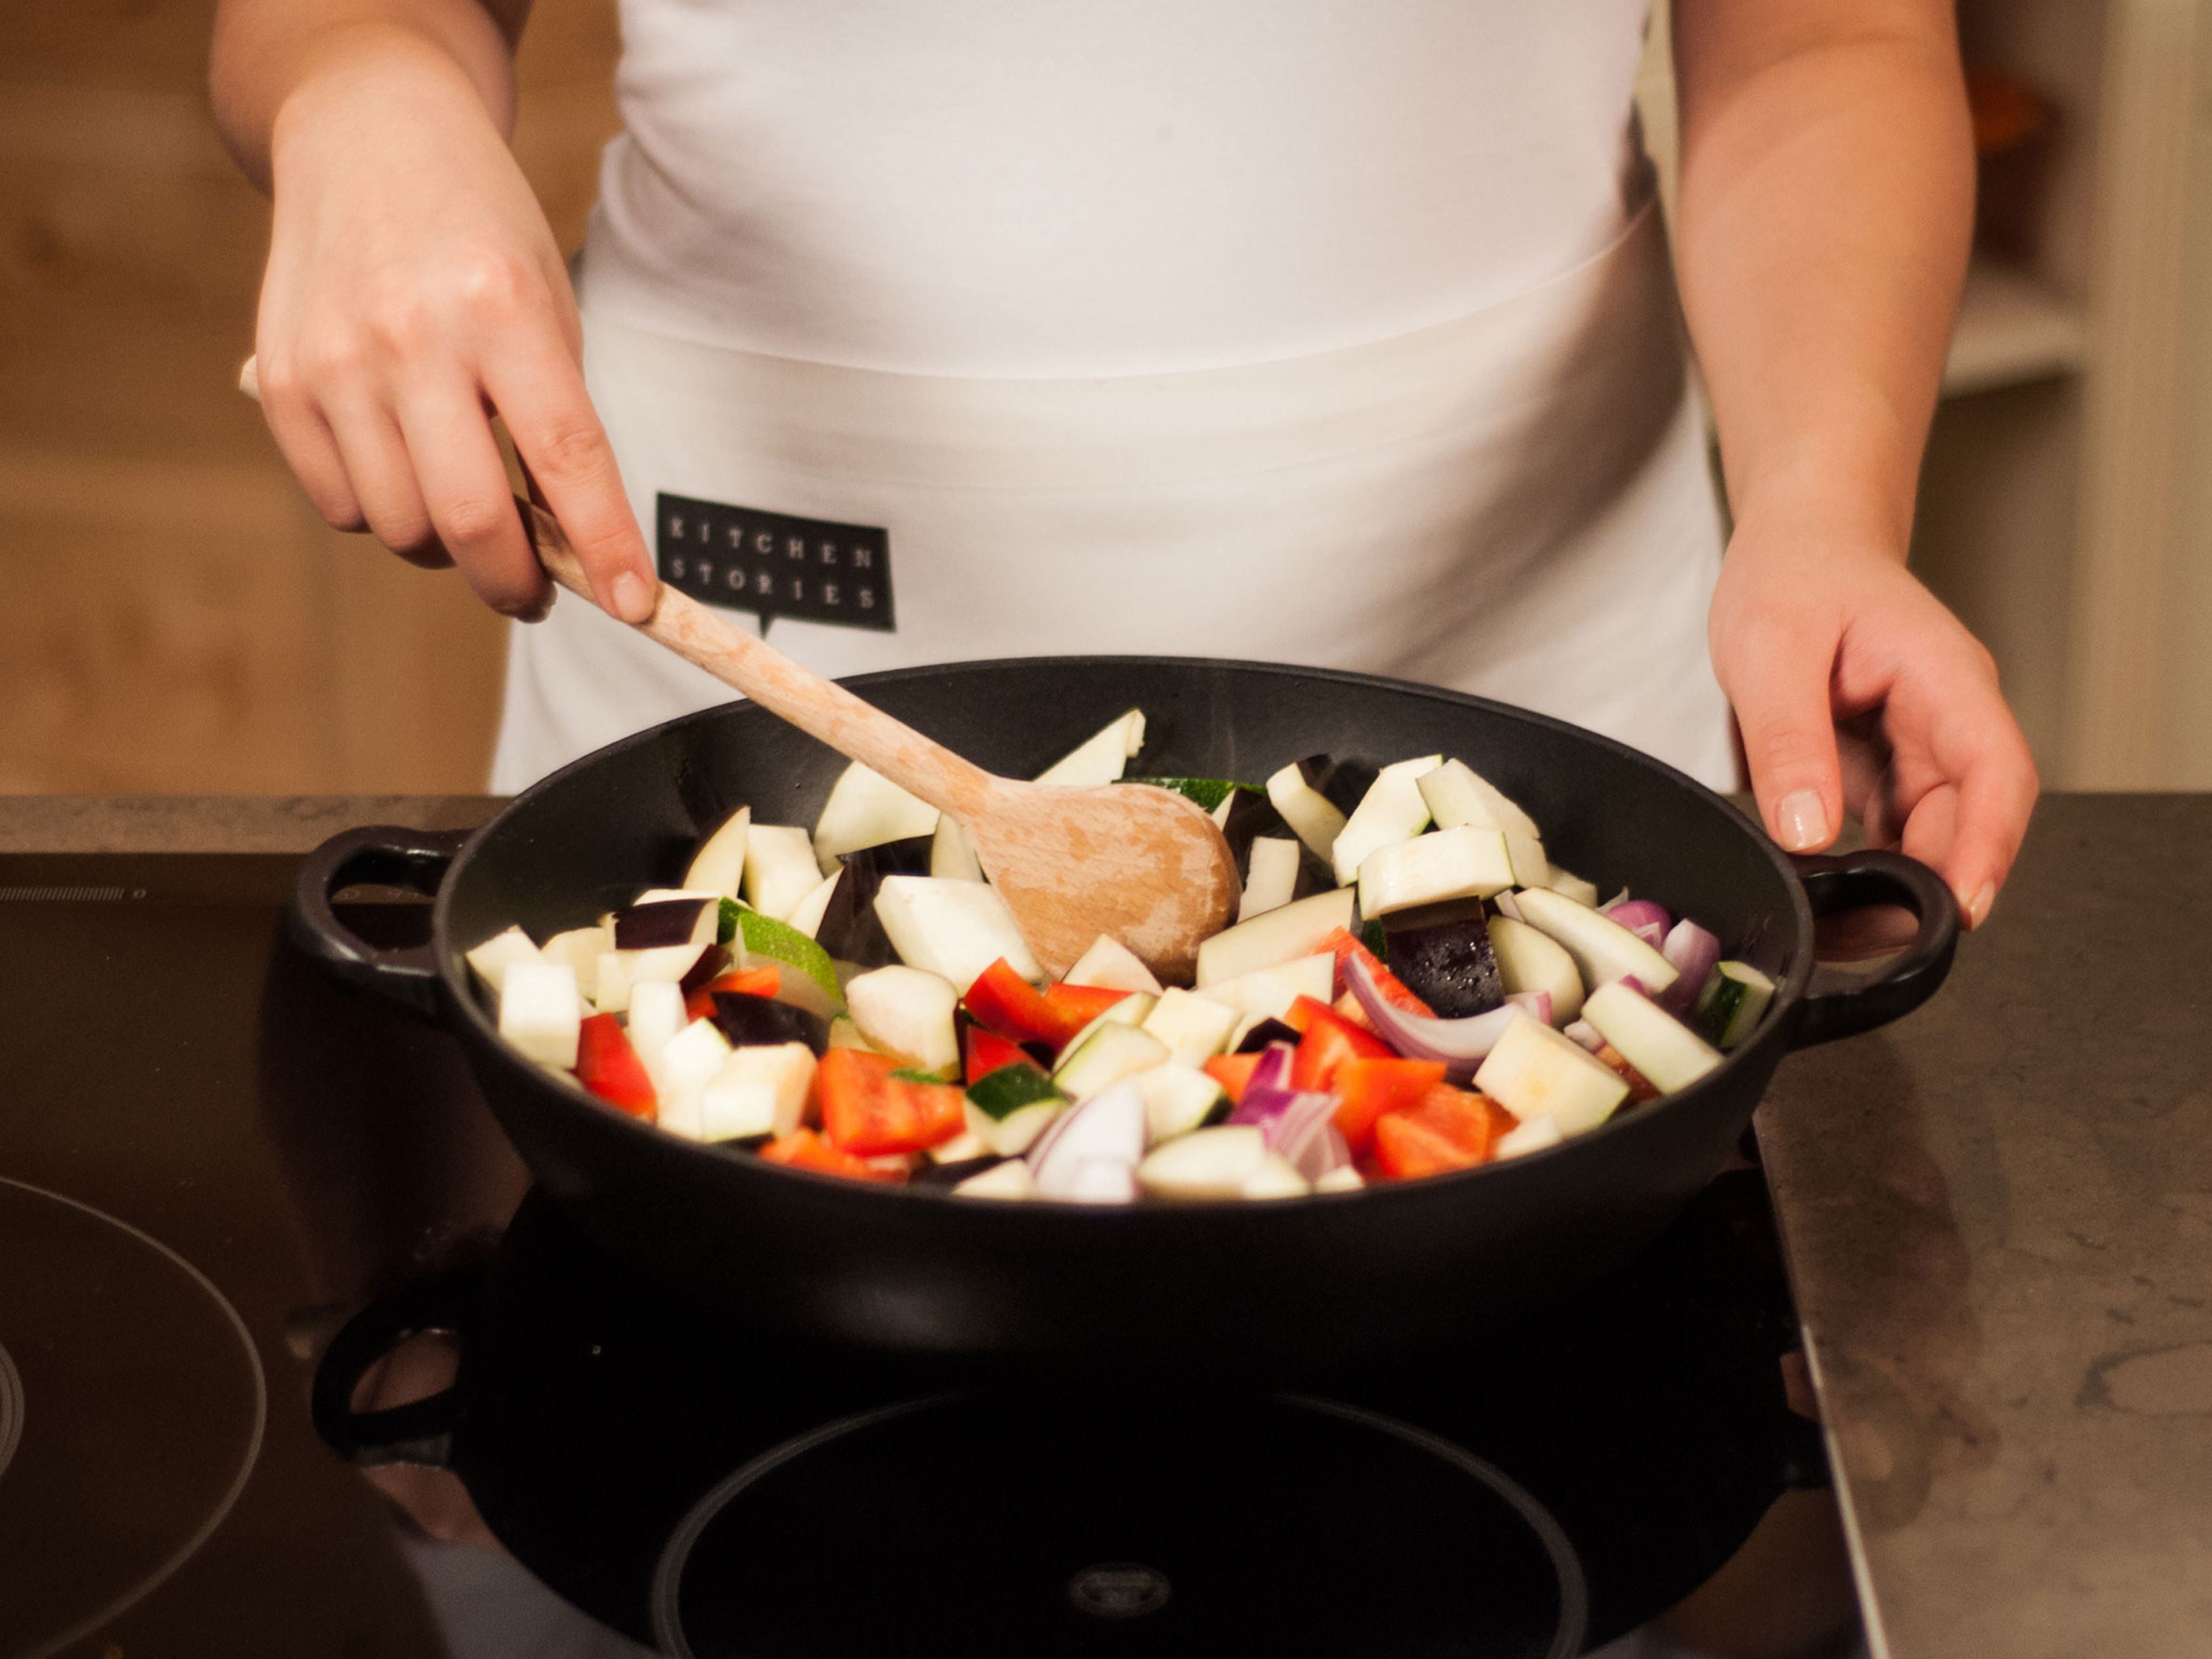 Add some olive oil to a frying pan and sauté garlic, onion, bell peppers, zucchini, and eggplant over medium-high heat for approx. 4 – 6 min.